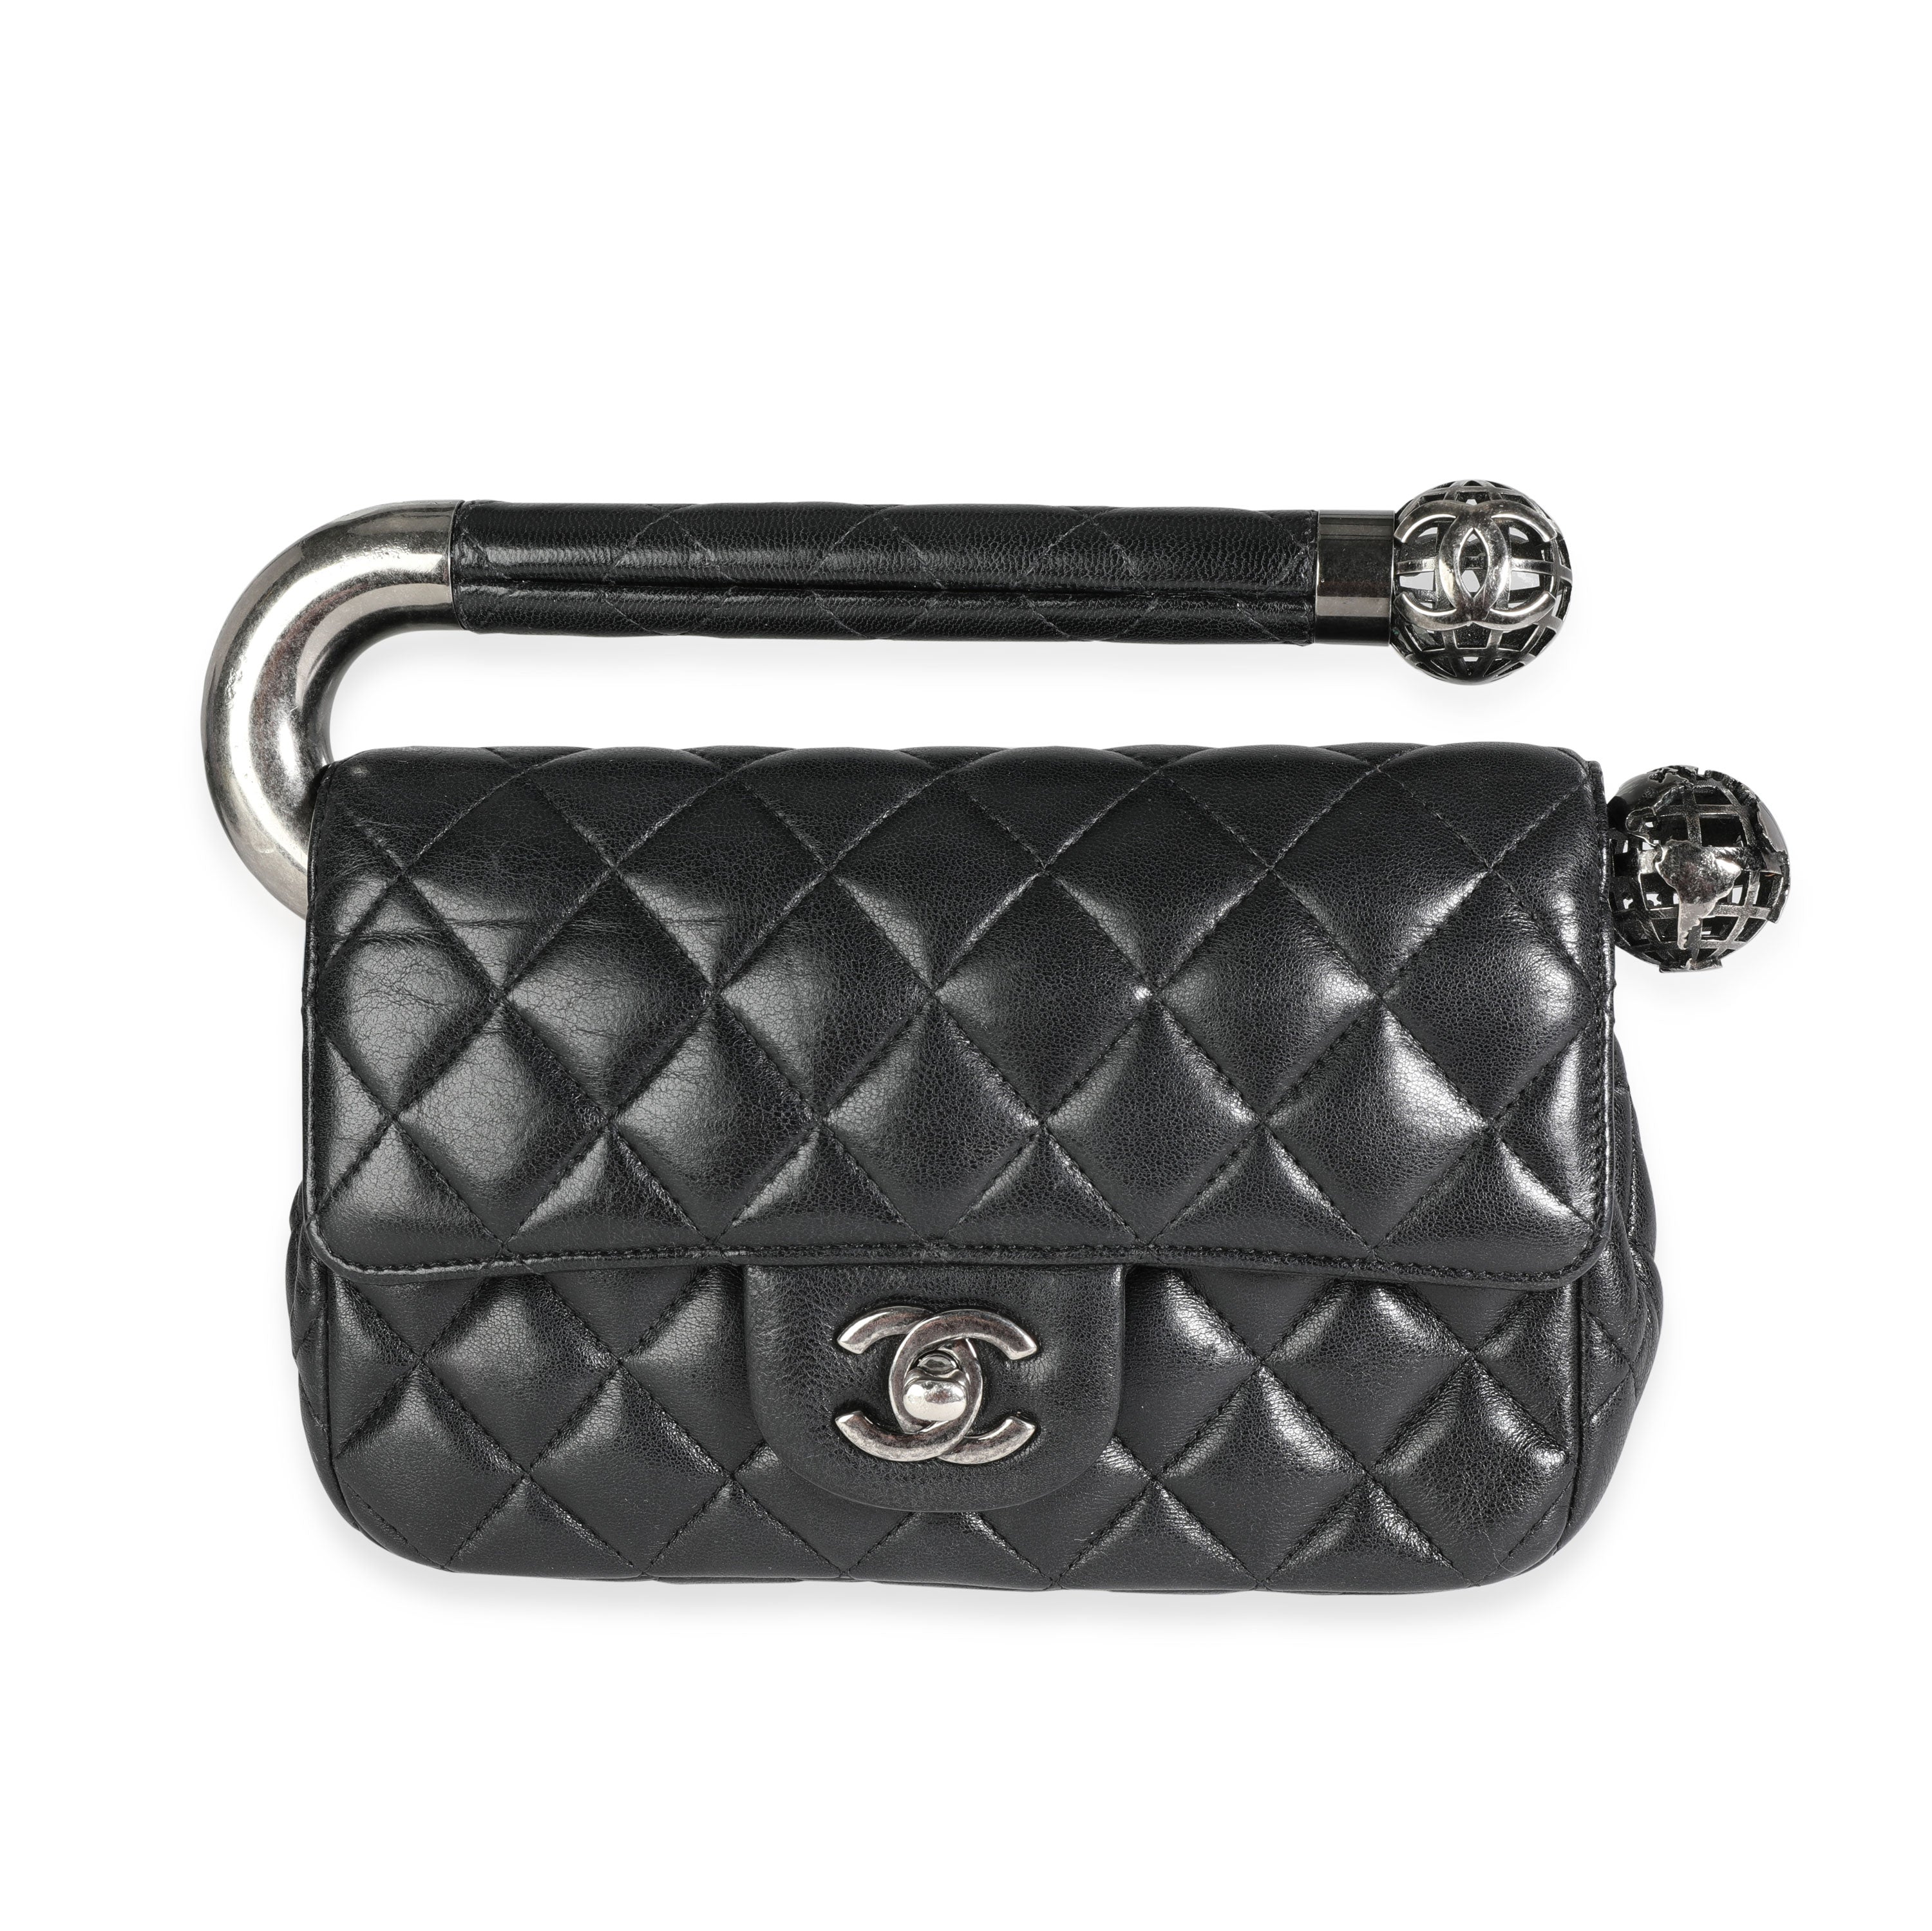 Chanel Black Quilted Lambskin Metal Bar Flap Bag